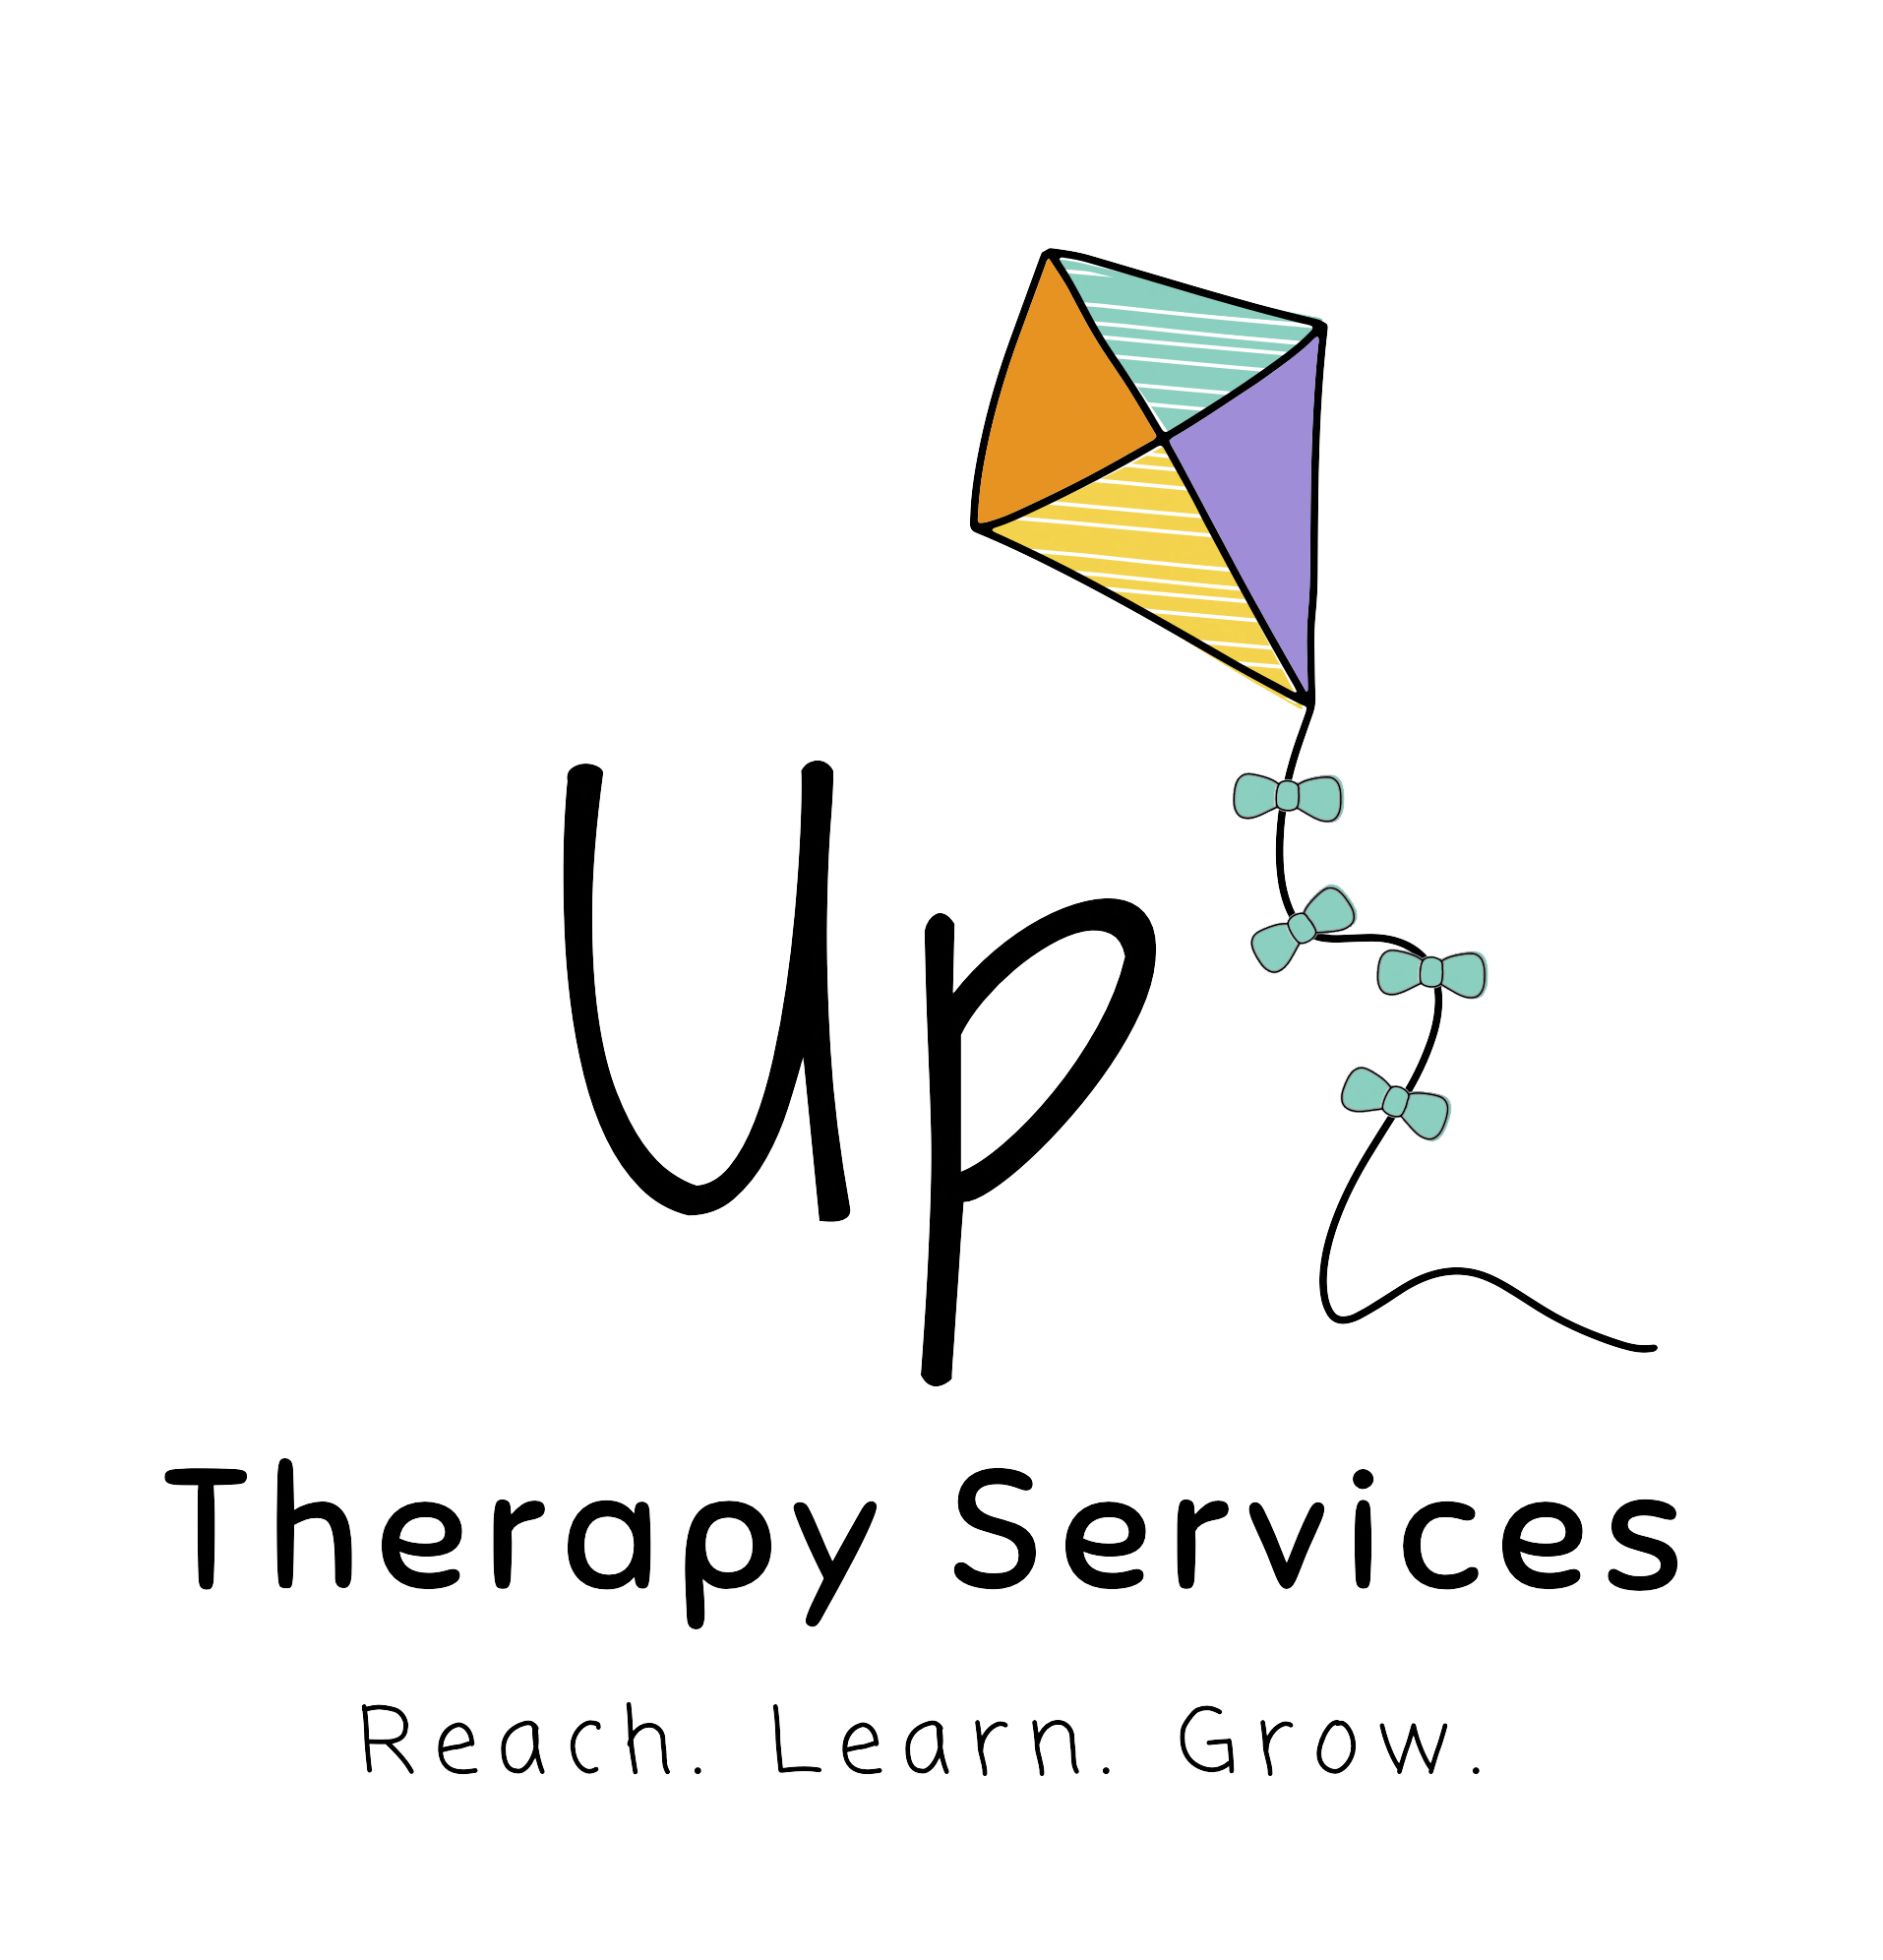 Up Therapy Services: Highlighting the importance of early intervention in the early years